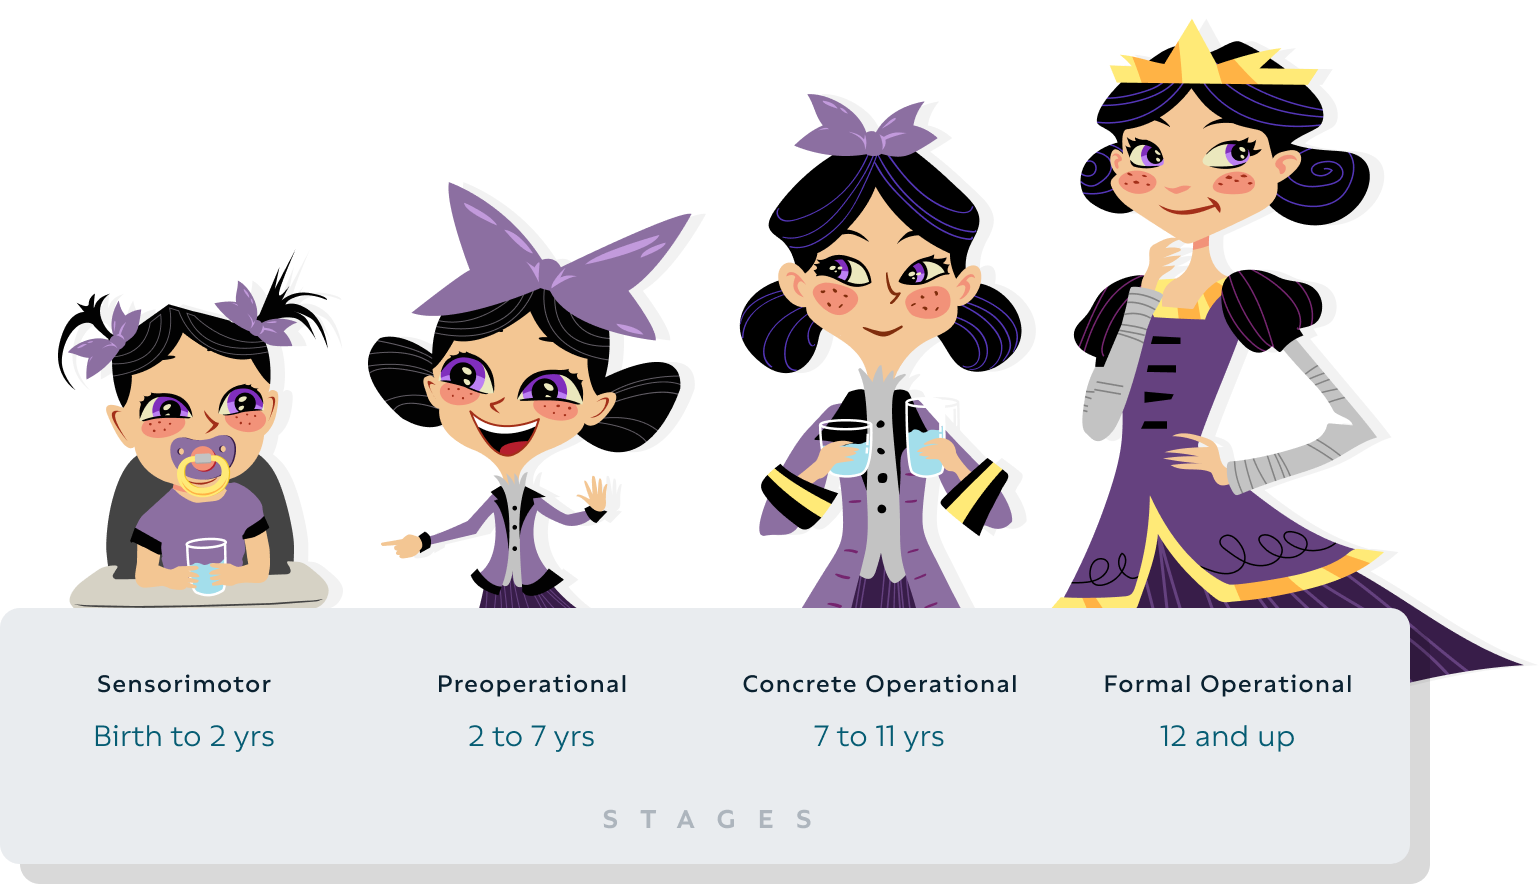 Four characters demonstrate Piaget's stages of cognitive development: sensorimotor, preoperational, concrete operational and formative operational.